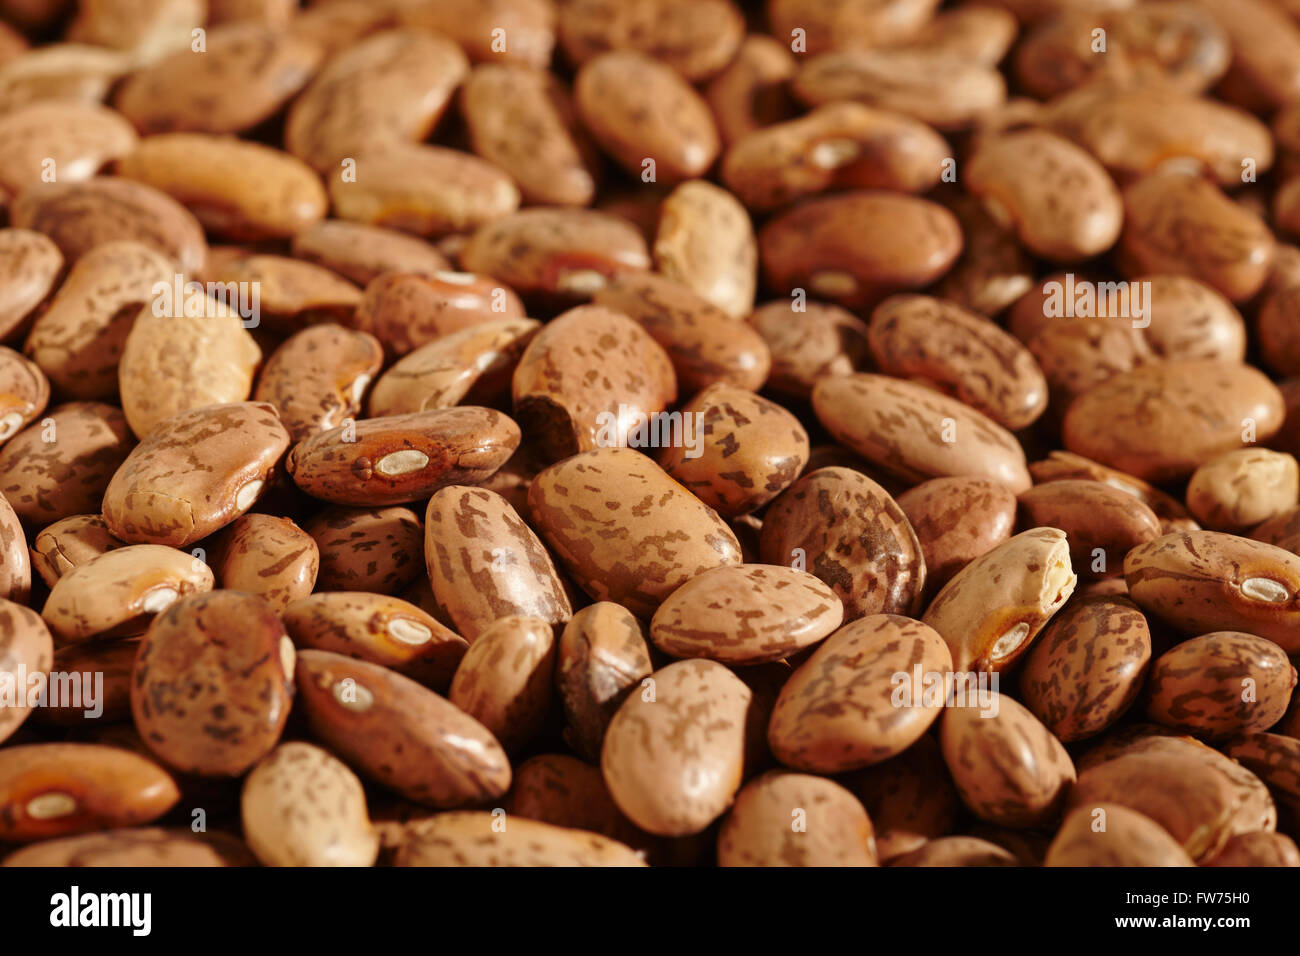 Dried Uncooked Pinto Beans Stock Photo